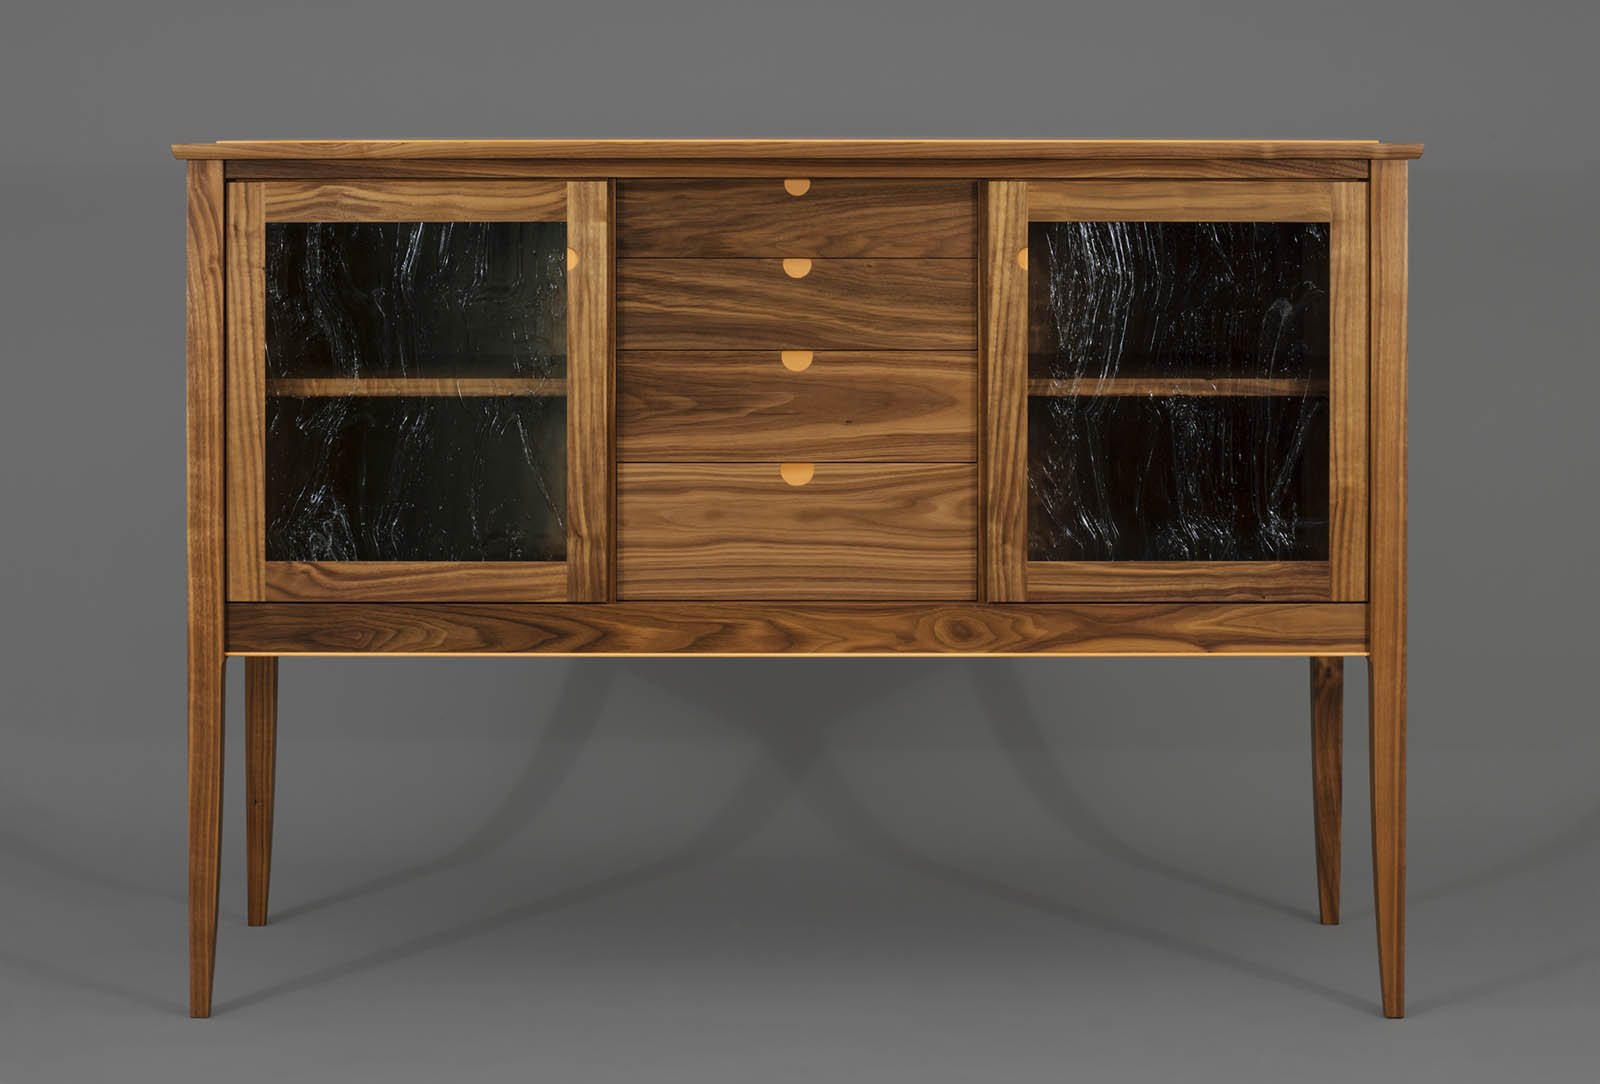 Fine furniture sideboard in claro walnut with pear wood detail by Hugh Montgomery